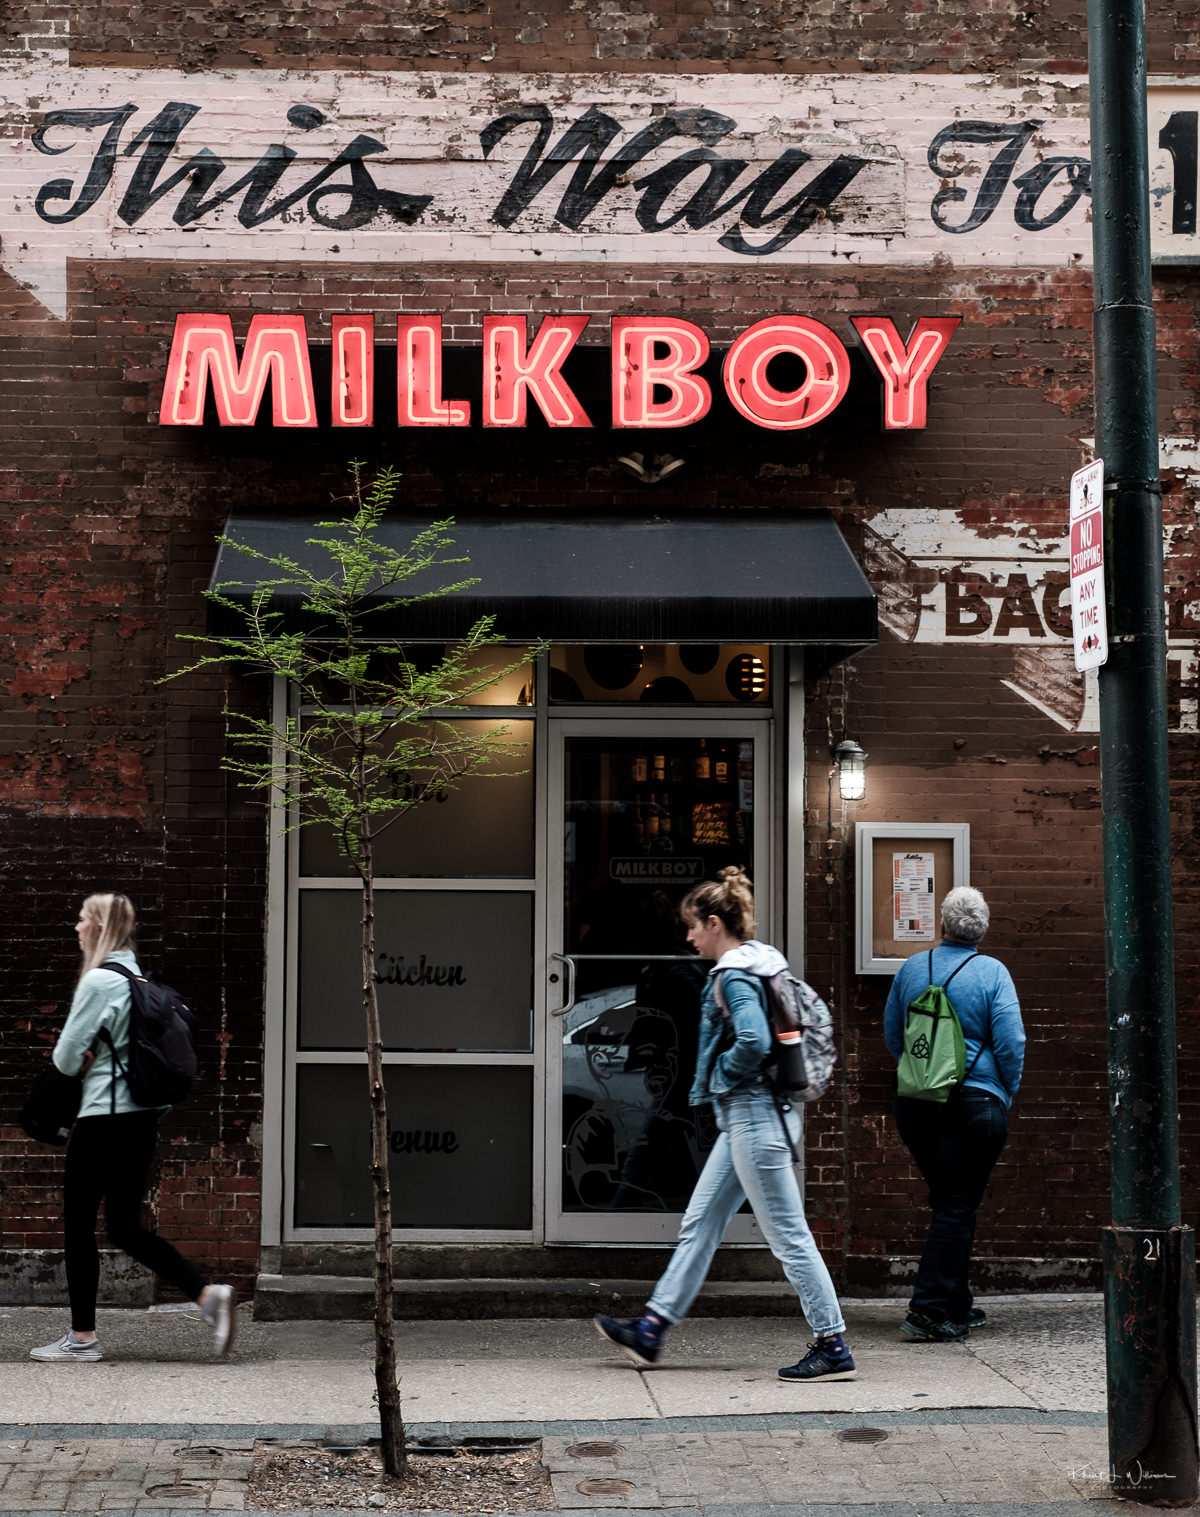 This way to MilkBoy?